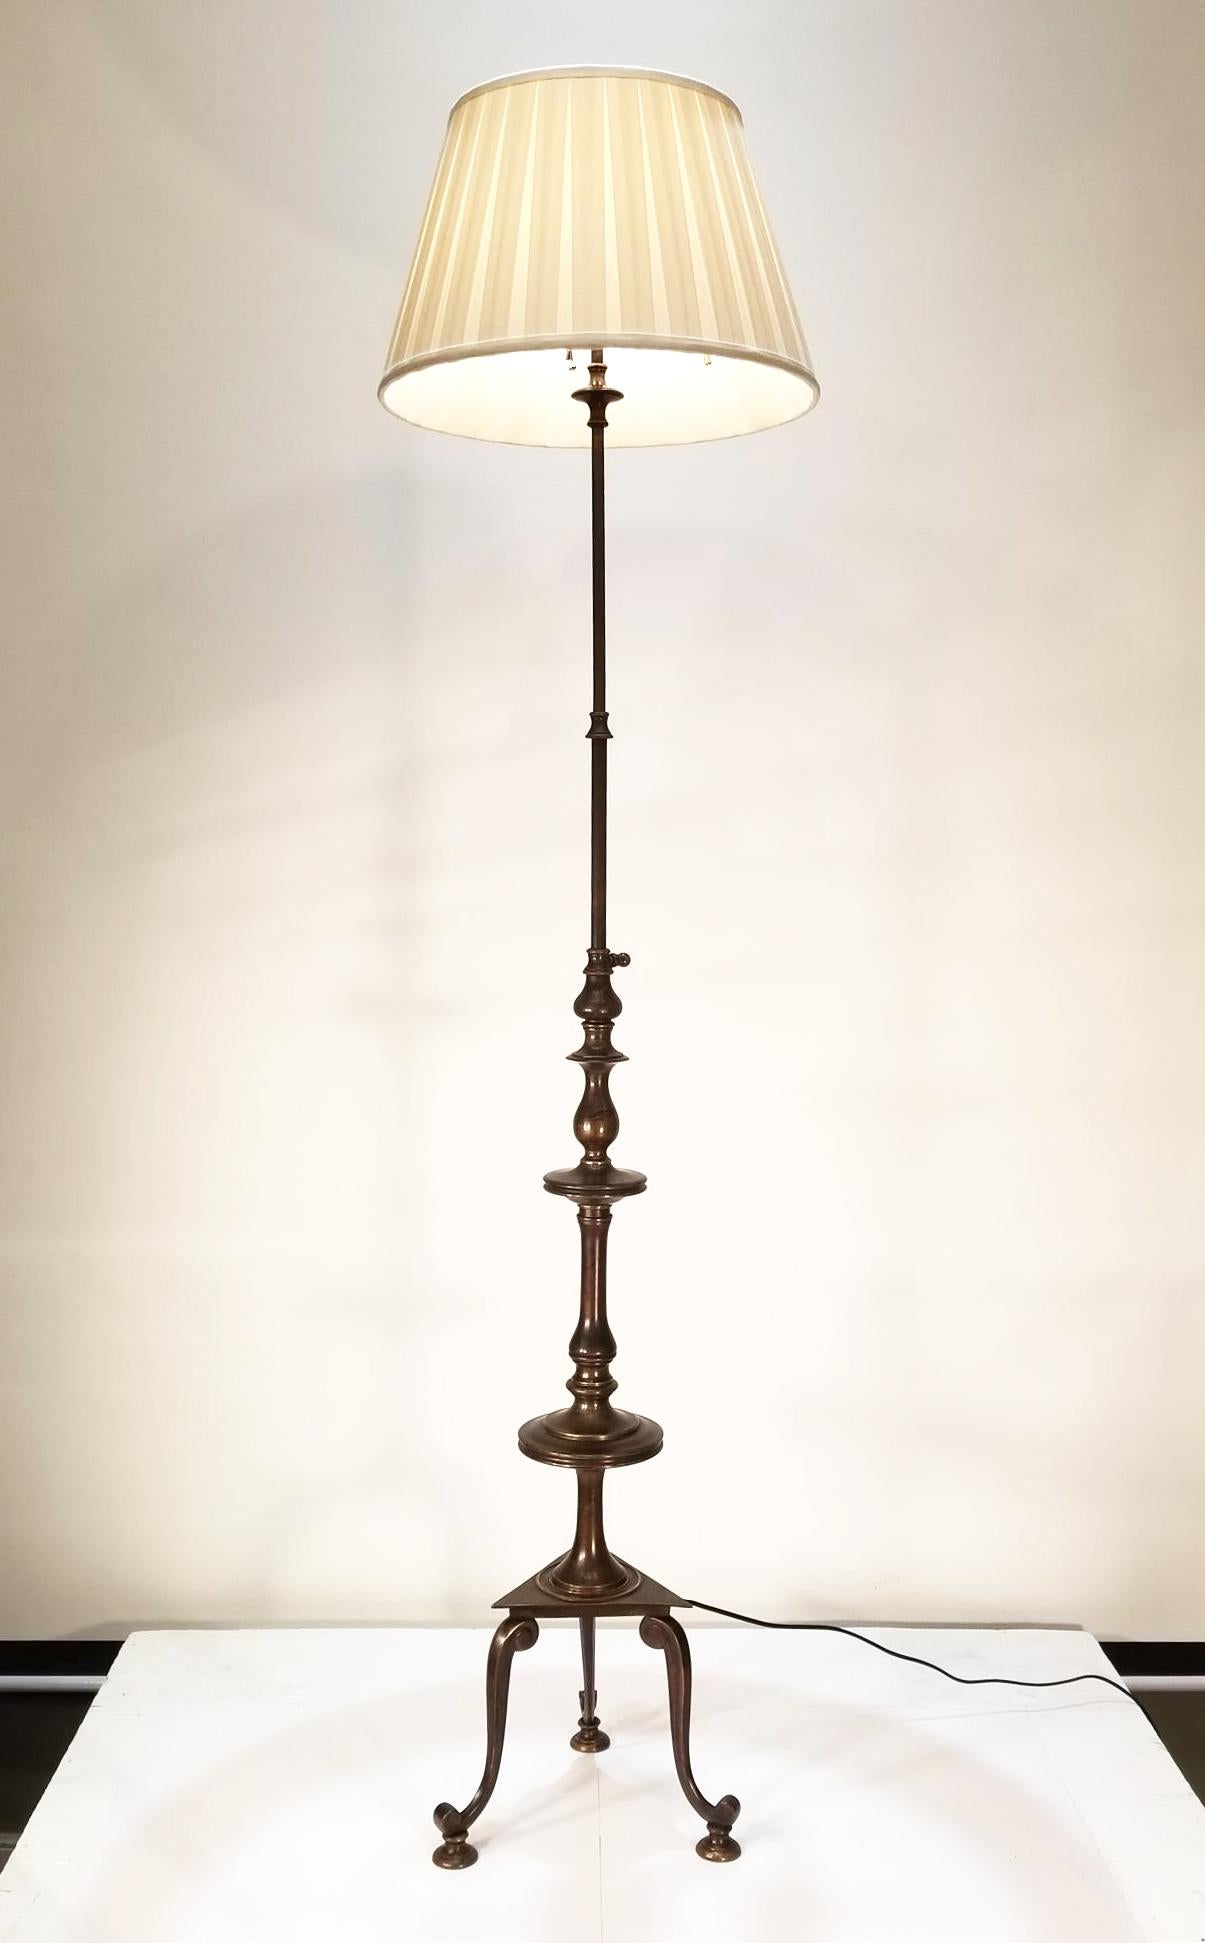 A beautiful patinated bronze antique floor lamp with a classical turned and cast stem that can be adjusted in height from 58 inches to 68 inches or anywhere in between. This tripartite base lamp retains its original three light pull chain cluster